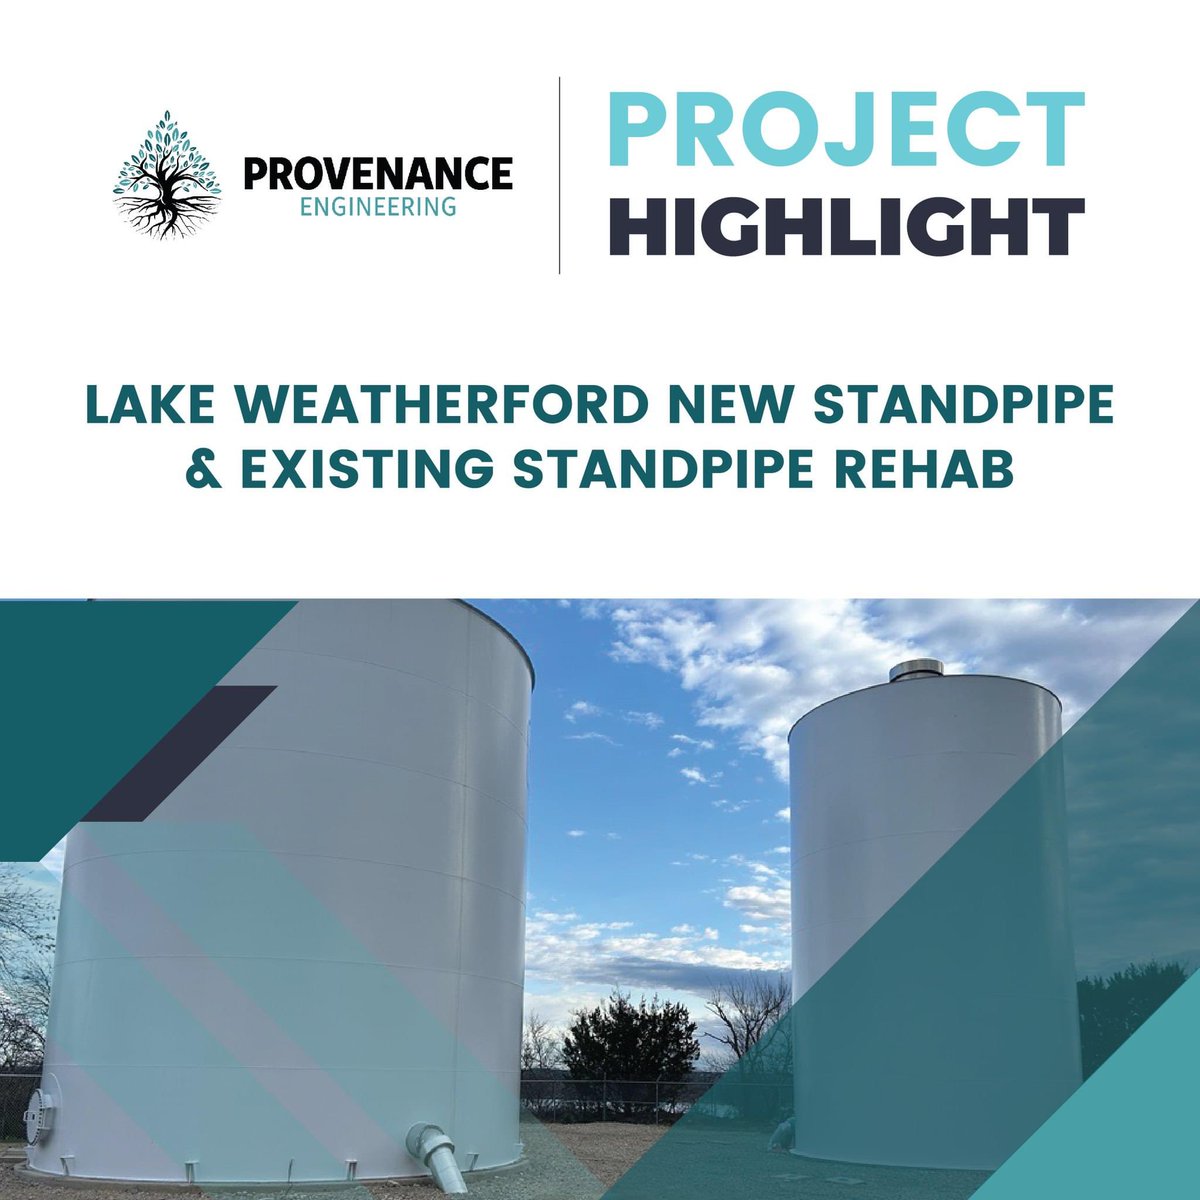 Provenance designed this project which included a new 200,000-gal tank & rehab of an existing 100,000-gal tank. 

To review this project as well as multiple other Provenance Engineering projects, visit provenanceengineering.com/project.   

#UniquelyDifferent #CityofWeatherford